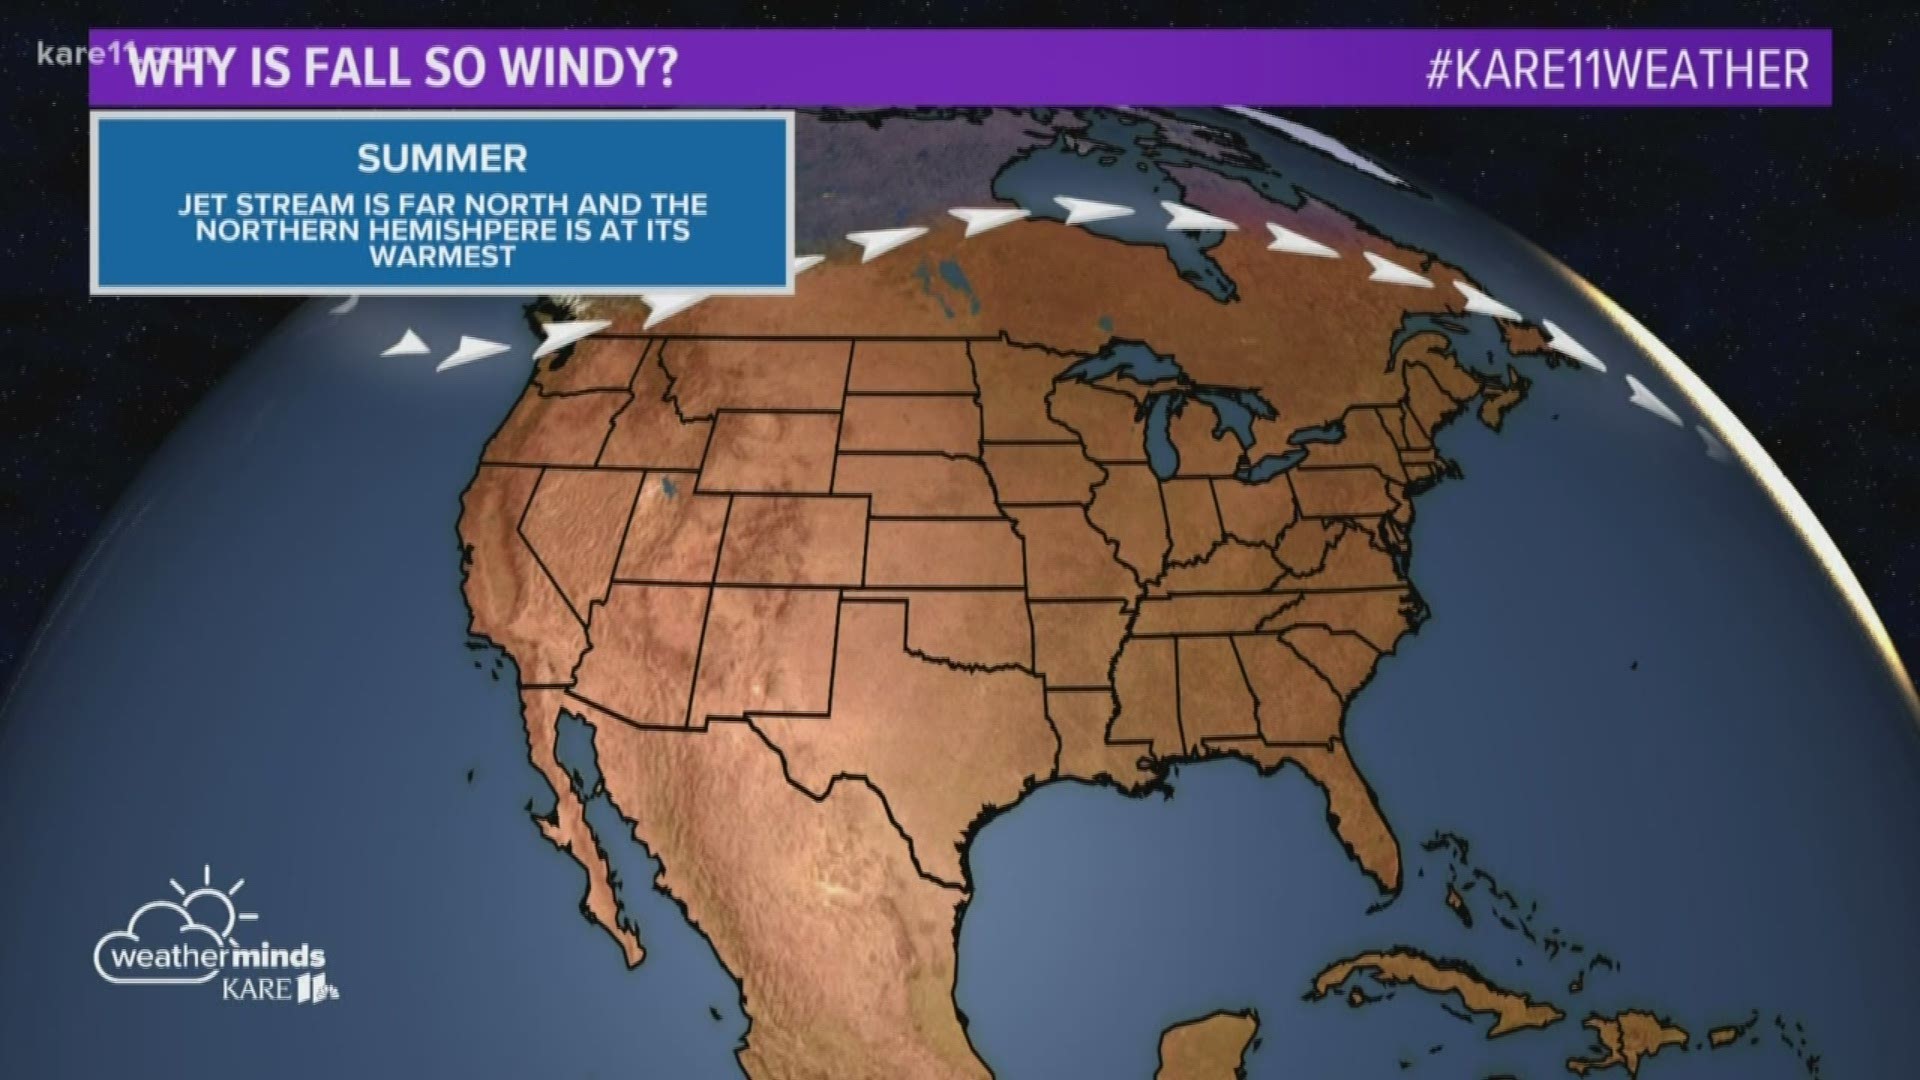 Weatherminds: Why is fall so windy?